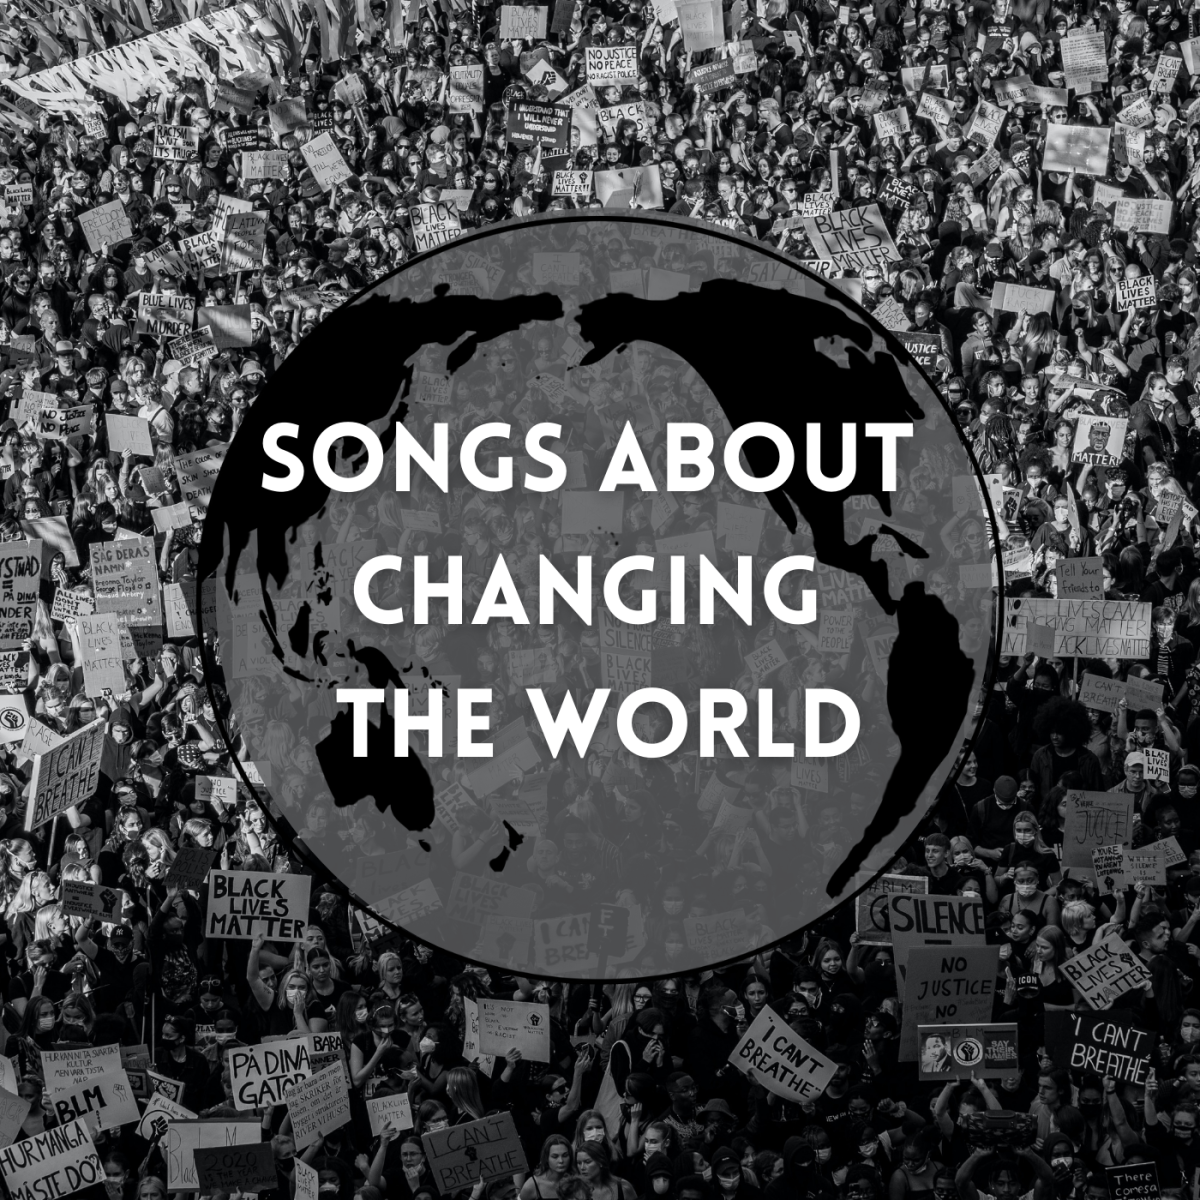 78 Songs About Changing the World